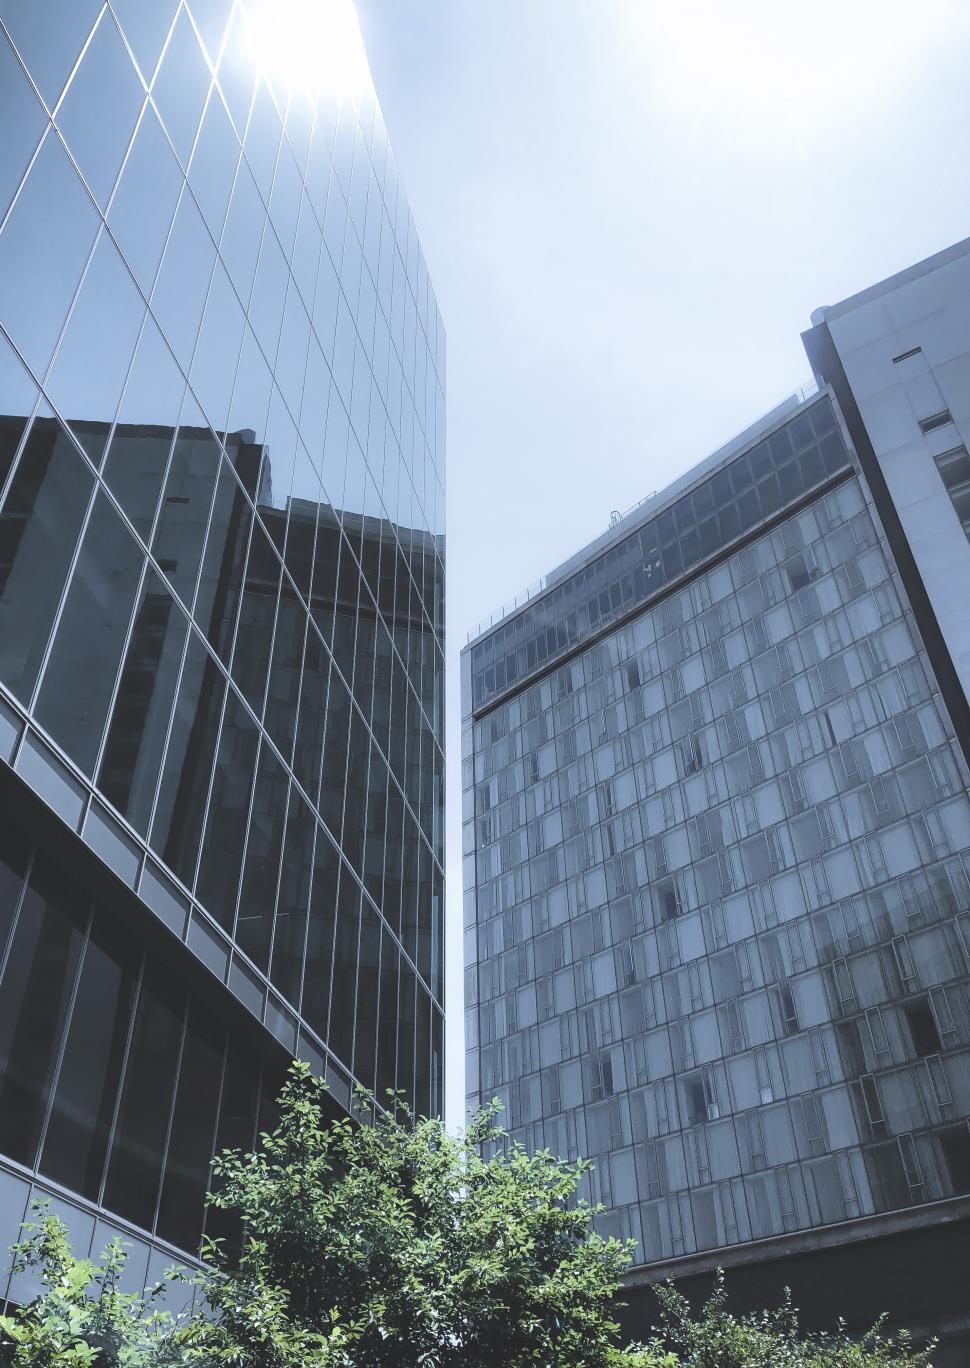 Free Image of Glass buildings 